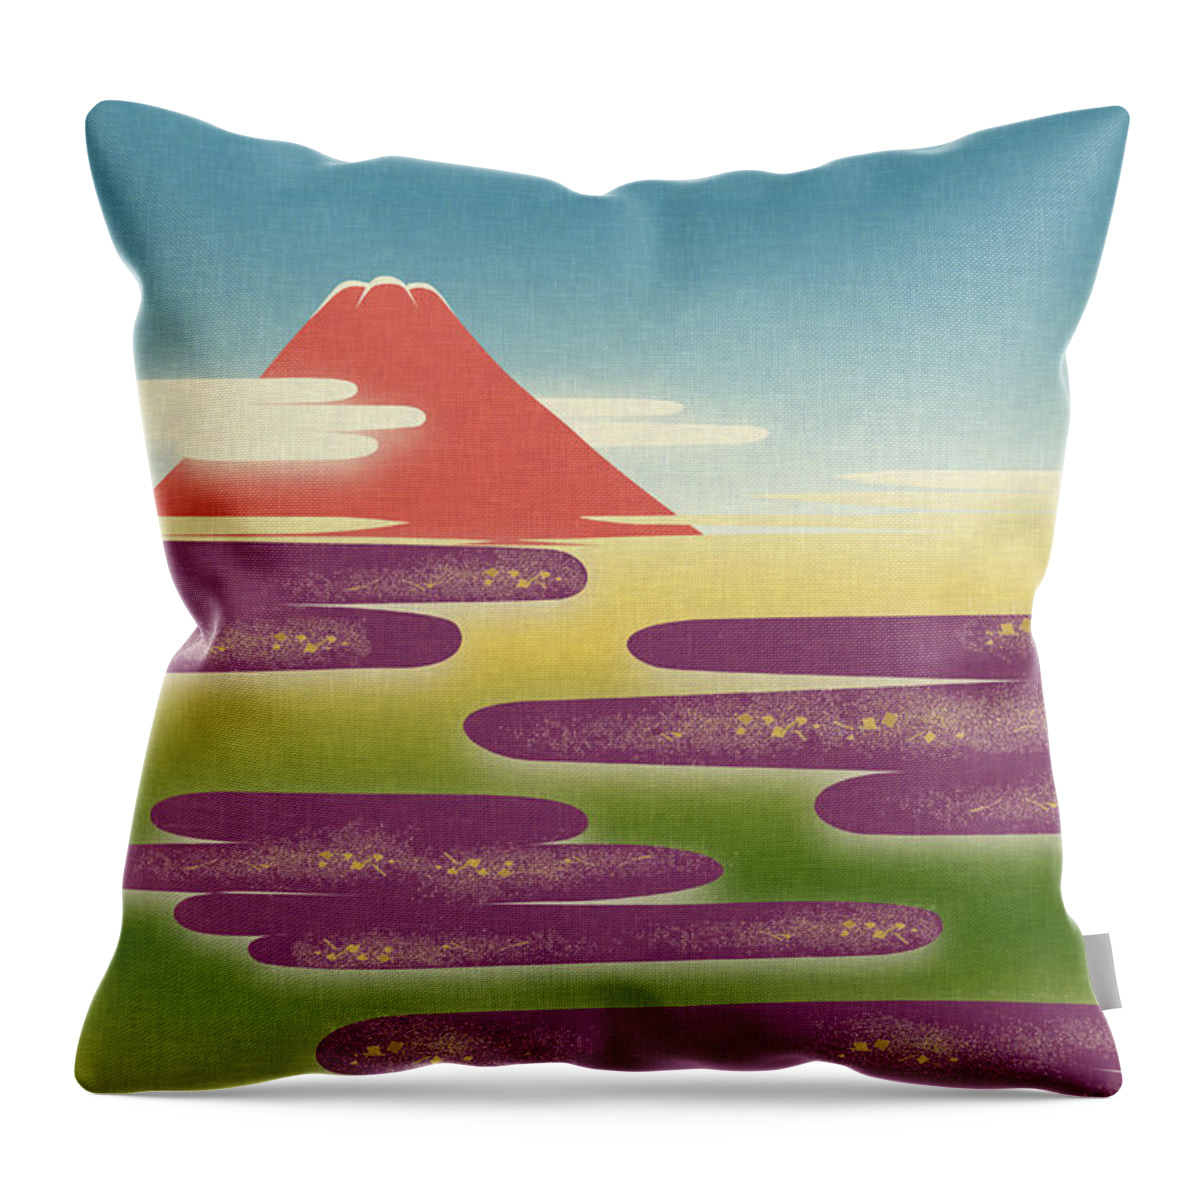 Scenics Throw Pillow featuring the digital art View Of Mt. Fuji Against Sky by Imagewerks